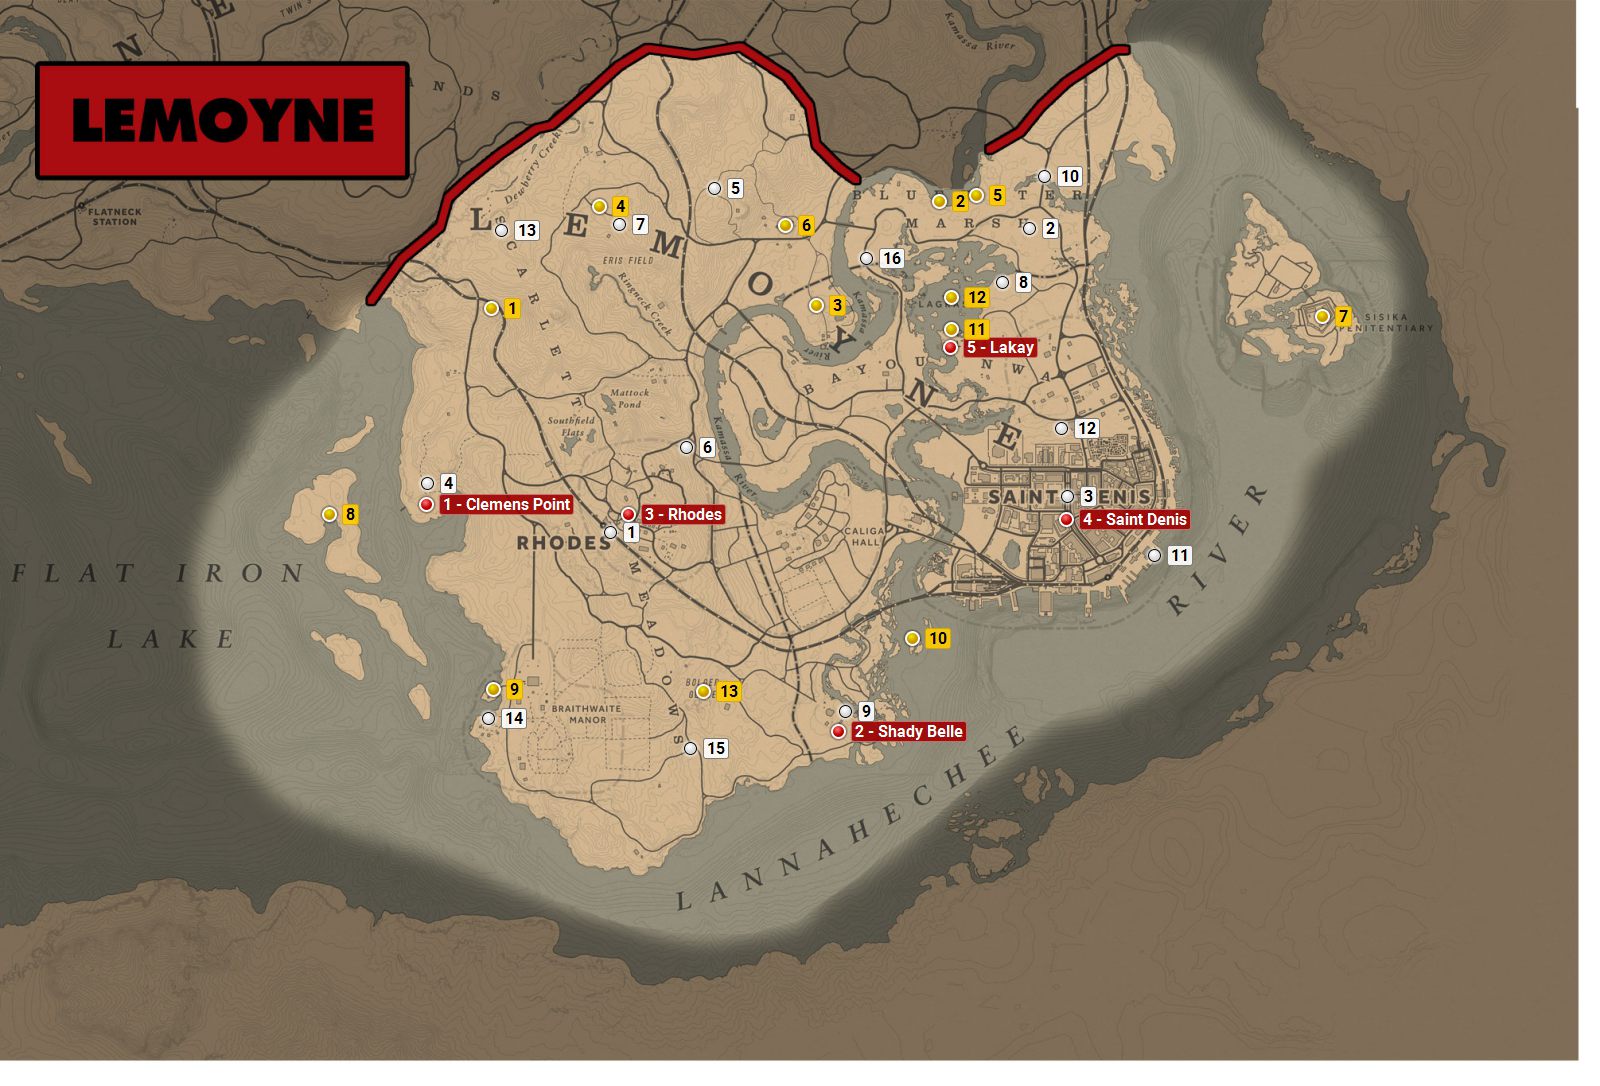 Red Dead Redemption 2 map size: FULL MAP and locations REVEALED, Gaming, Entertainment